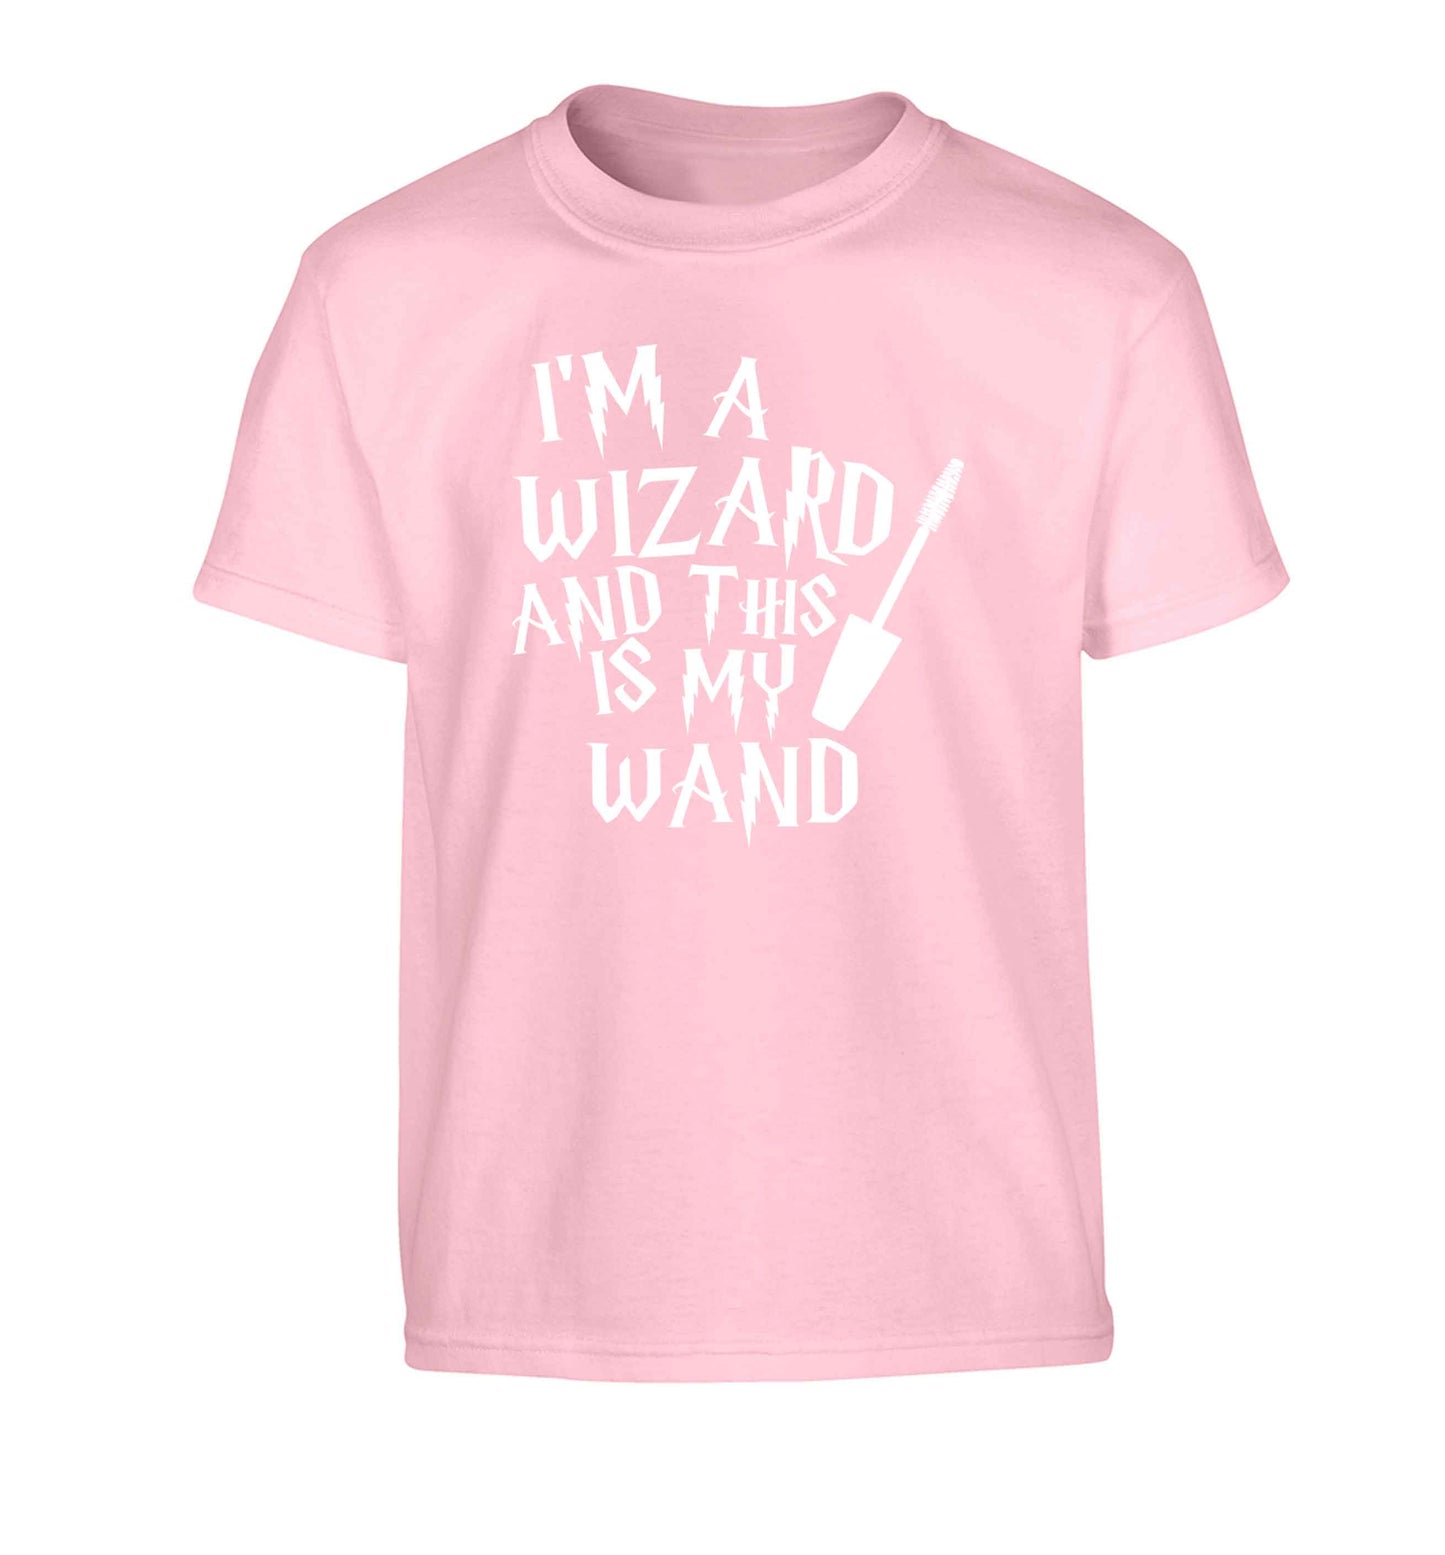 I'm a wizard and this is my wand Children's light pink Tshirt 12-13 Years